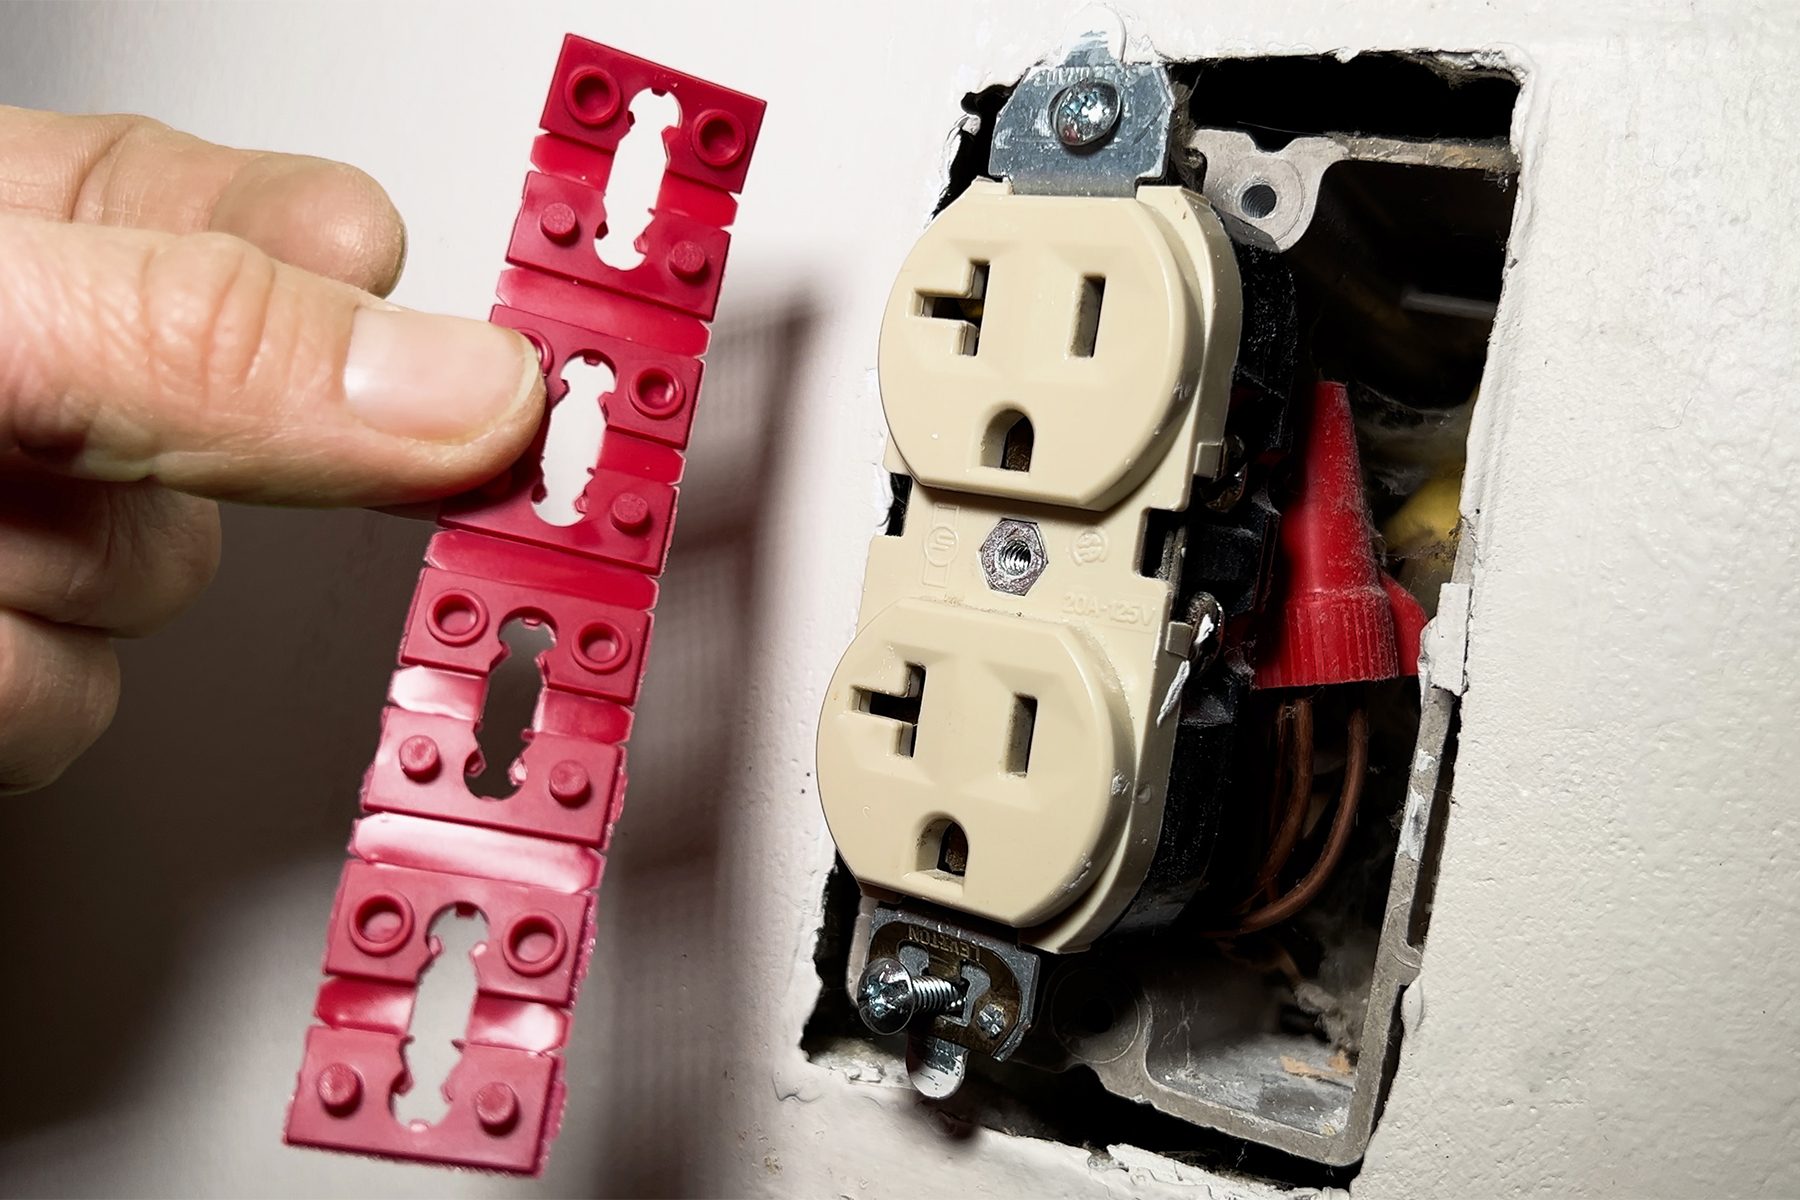 How To Fix Loose Outlets Fhmvs24 Mf 01 26 Looseoutlets 8